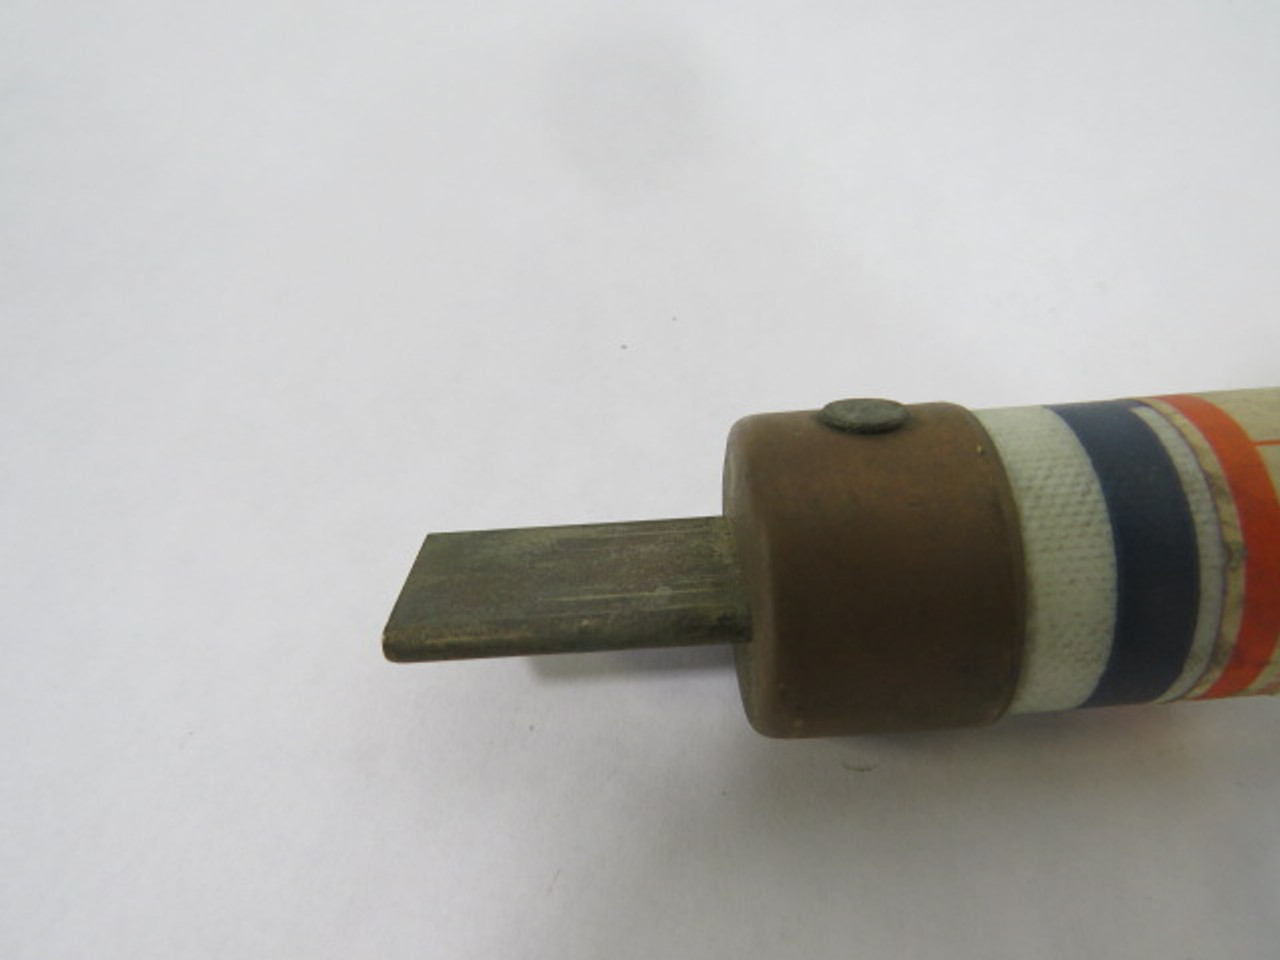 Cefco HS-70 Time Delay Fuse 70A 600V USED